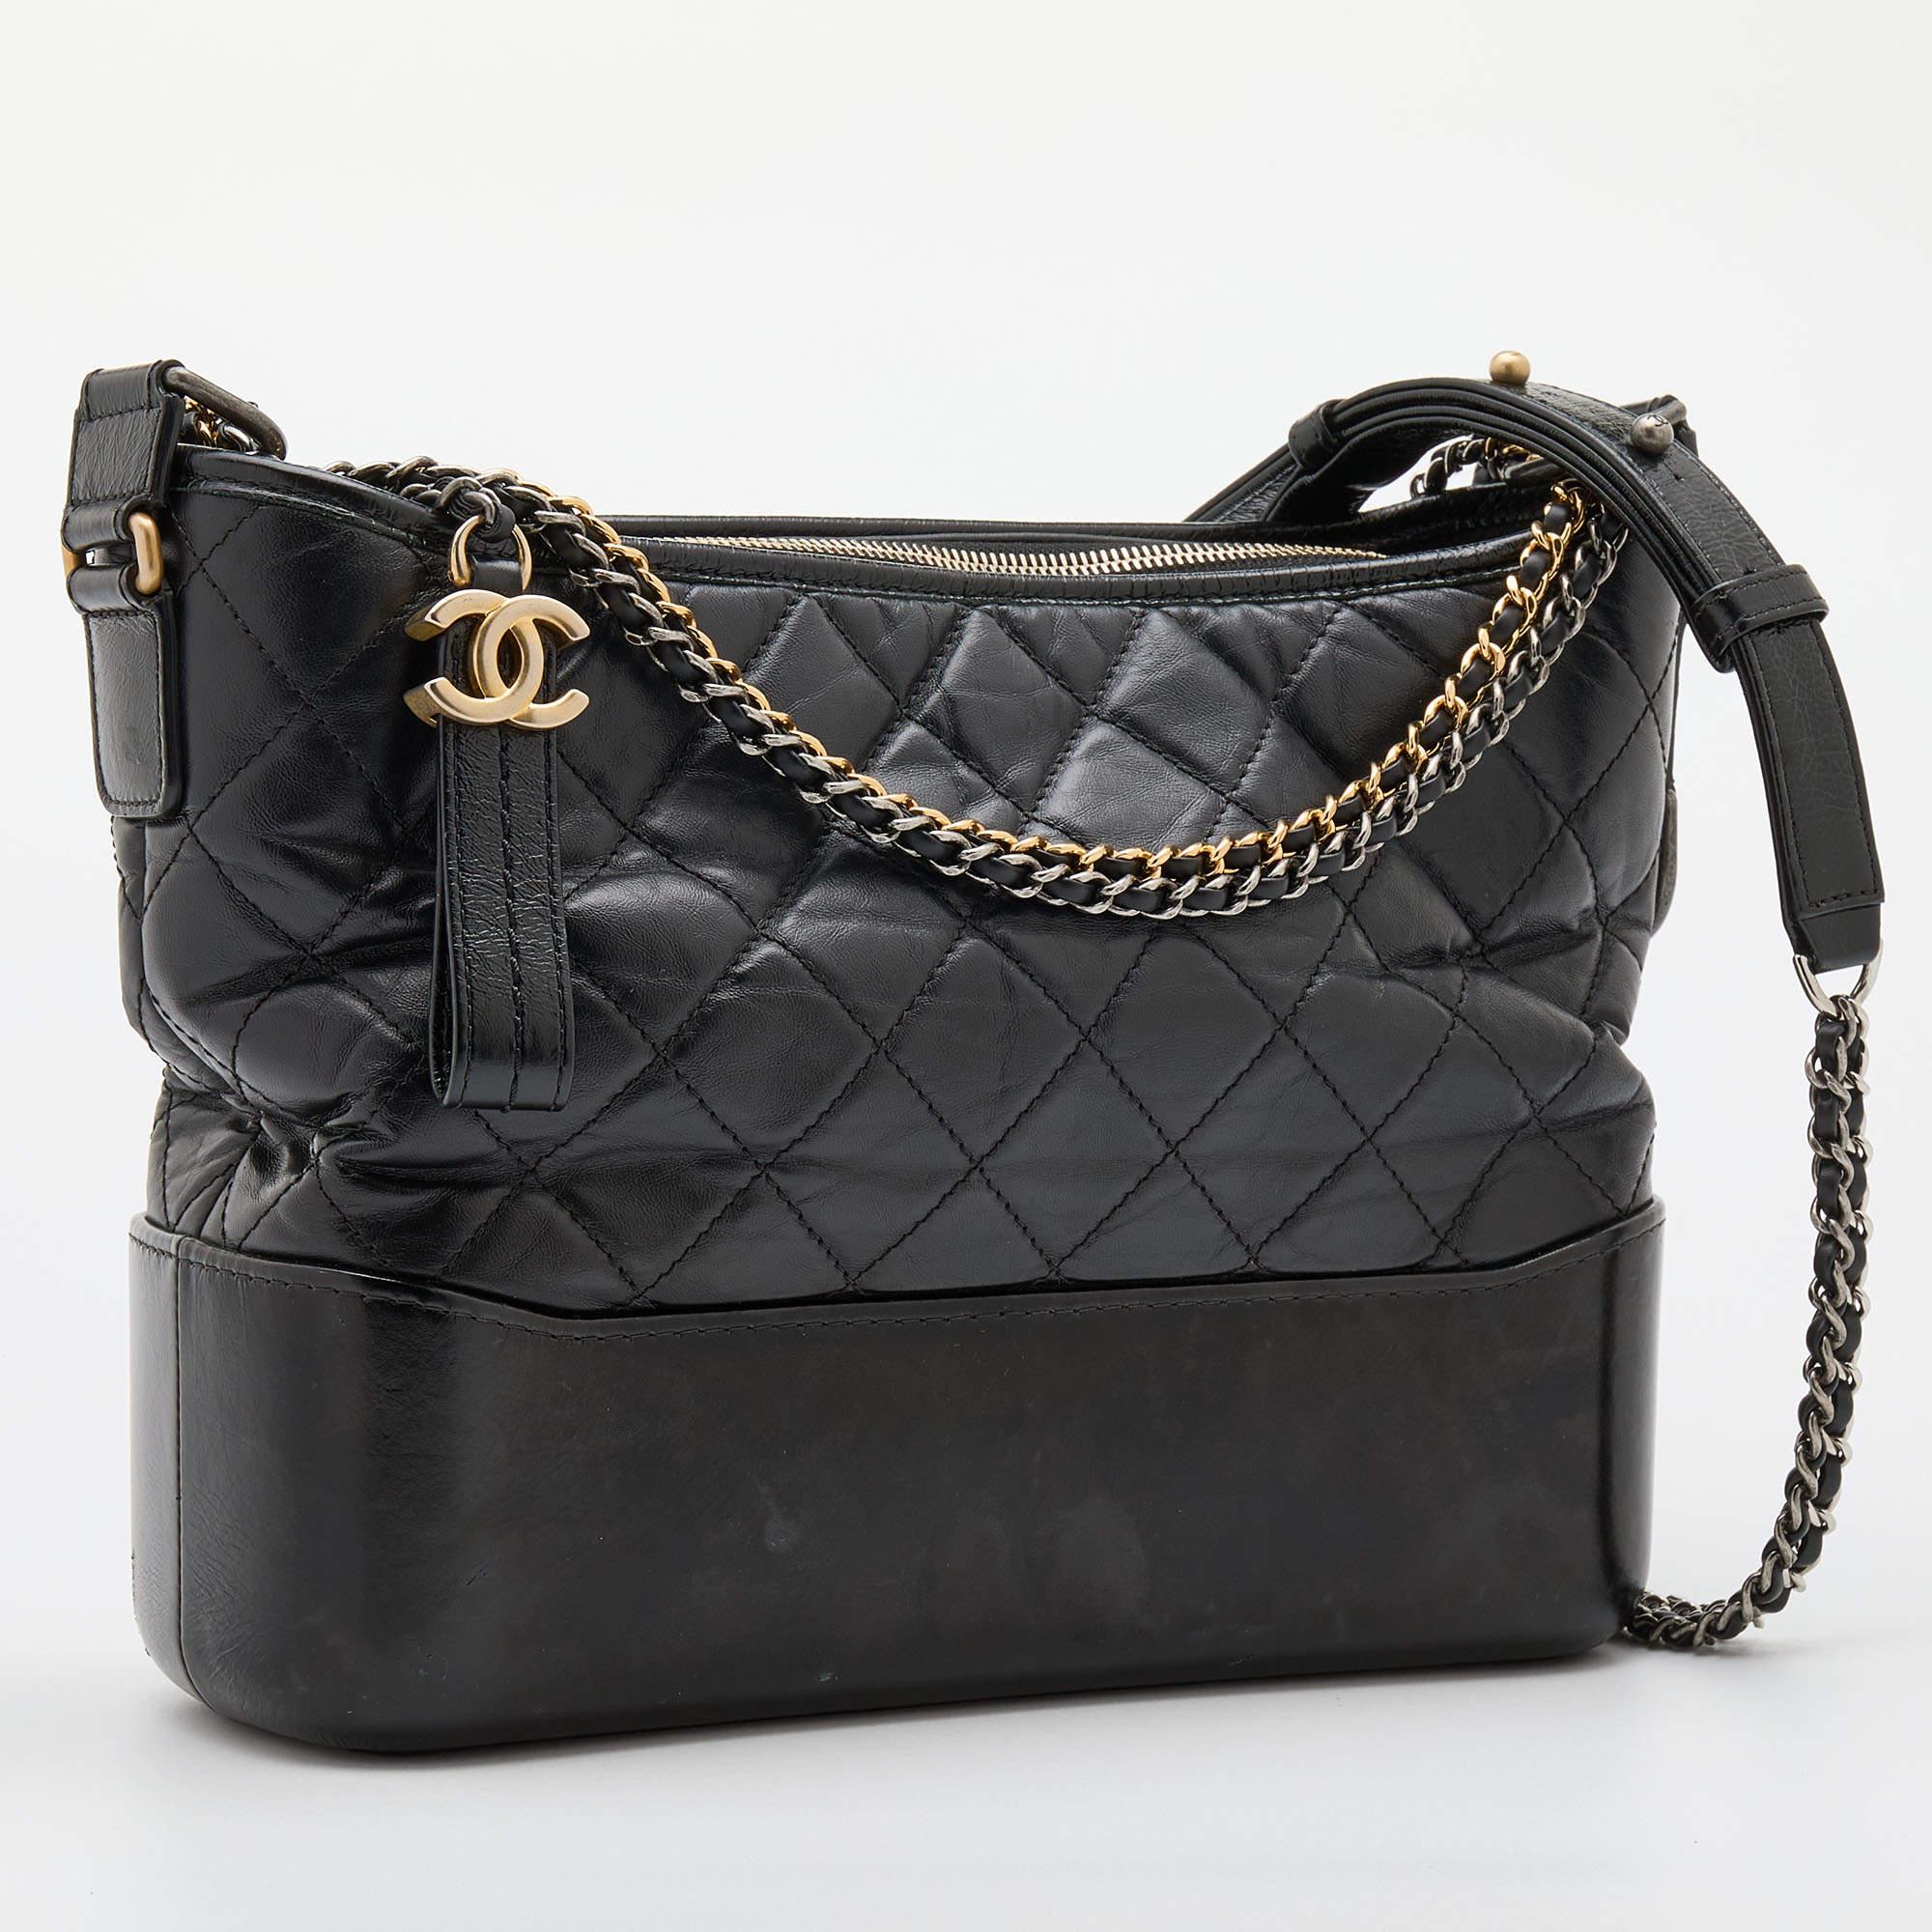 Women's Chanel Black Quilted Leather Medium Gabrielle Hobo